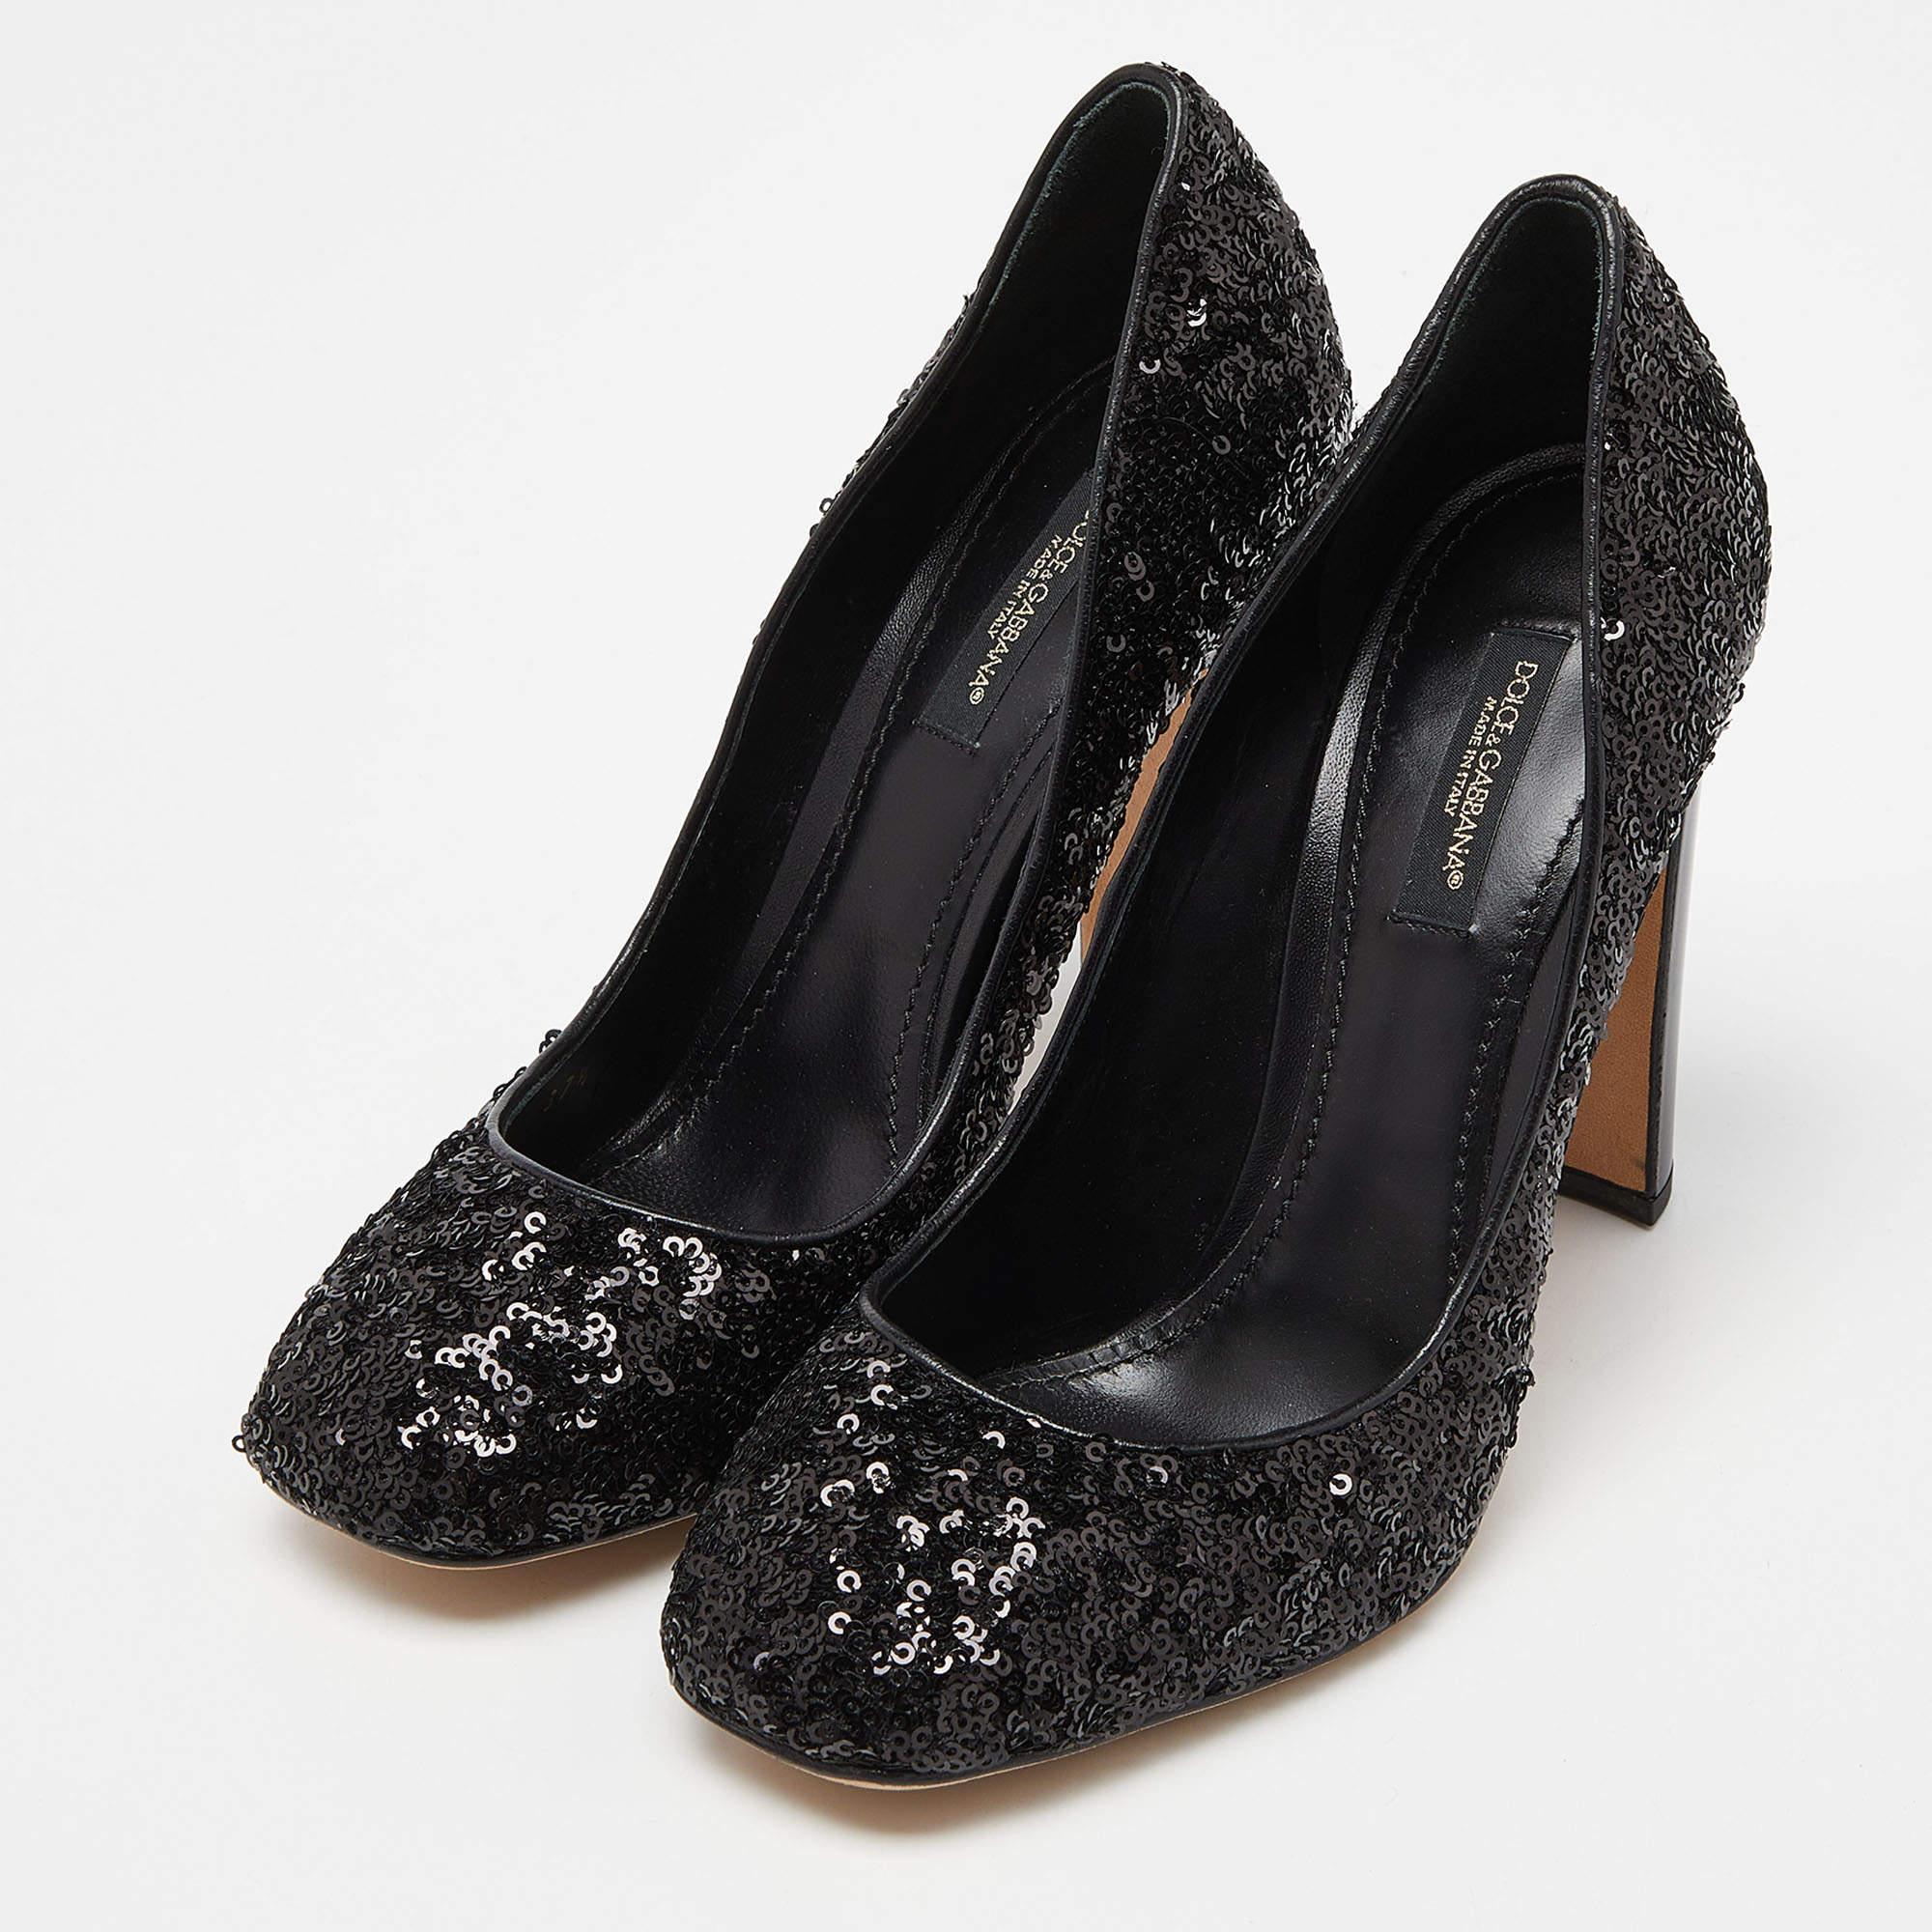 Dolce & Gabbana Black Sequins and Leather Block Heel Pumps Size 37.5 For Sale 4